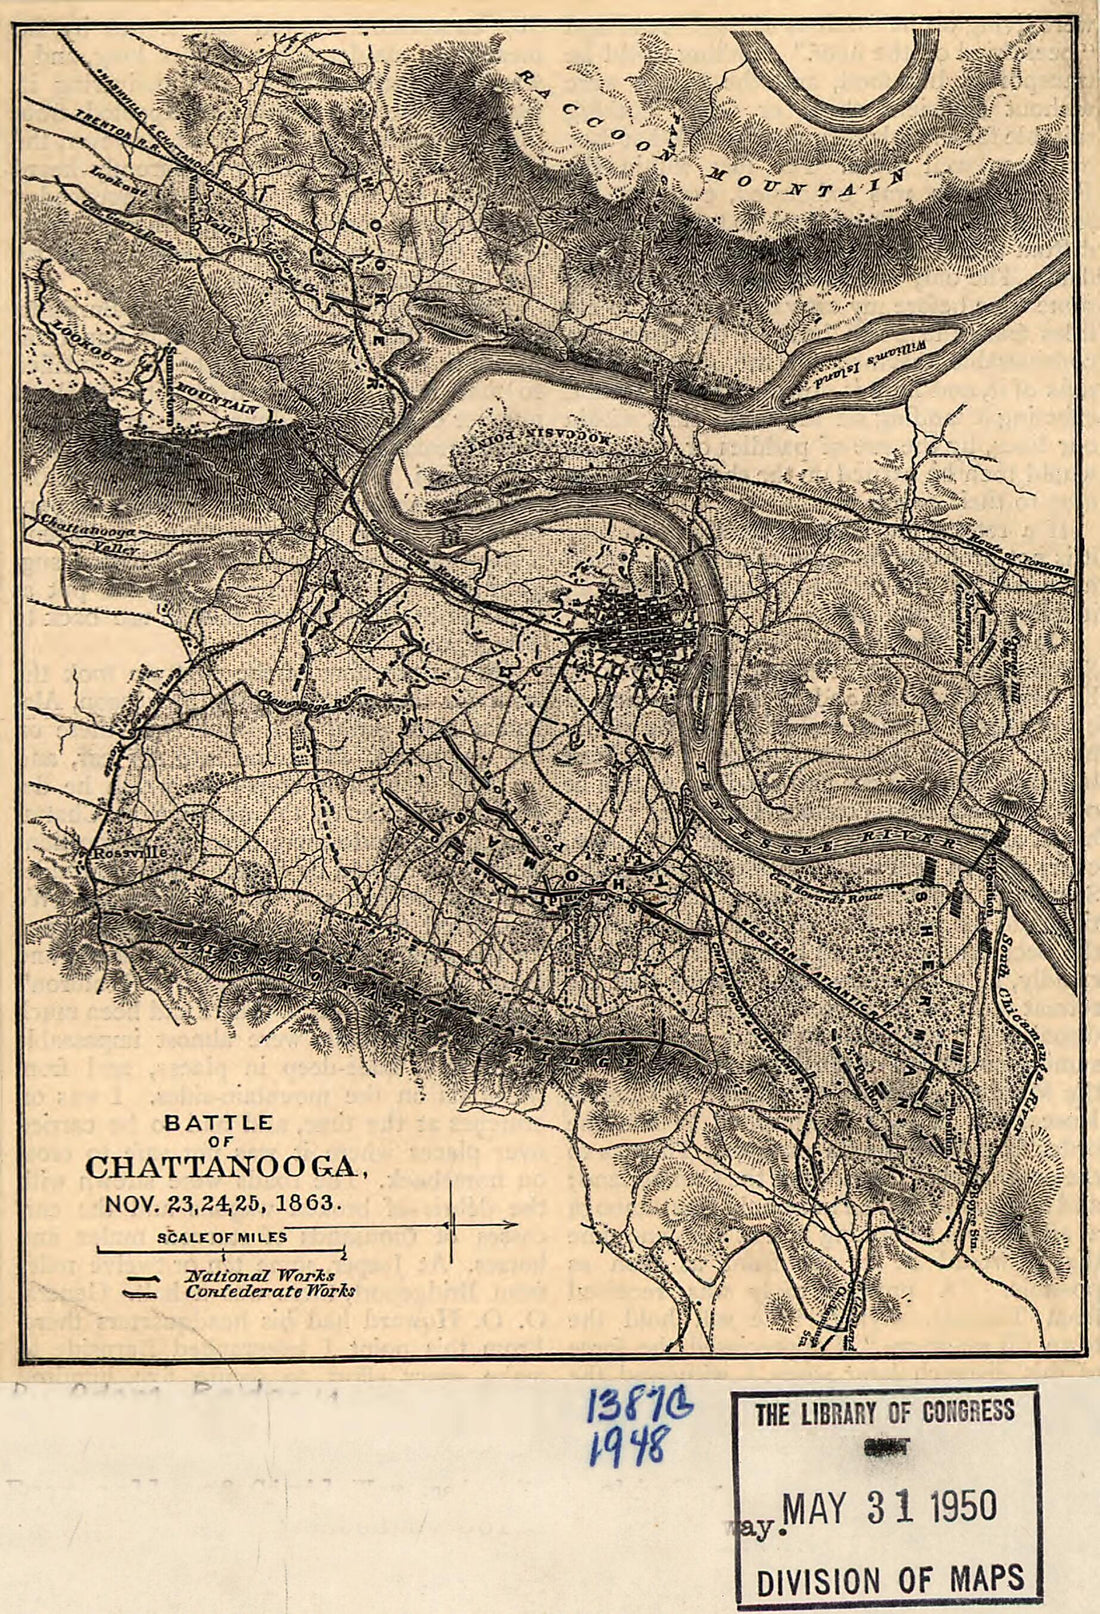 This old map of Battle of Chattanooga, Nov. 23, 24, 25, 1863 from 1885 was created by Adam Badeau in 1885